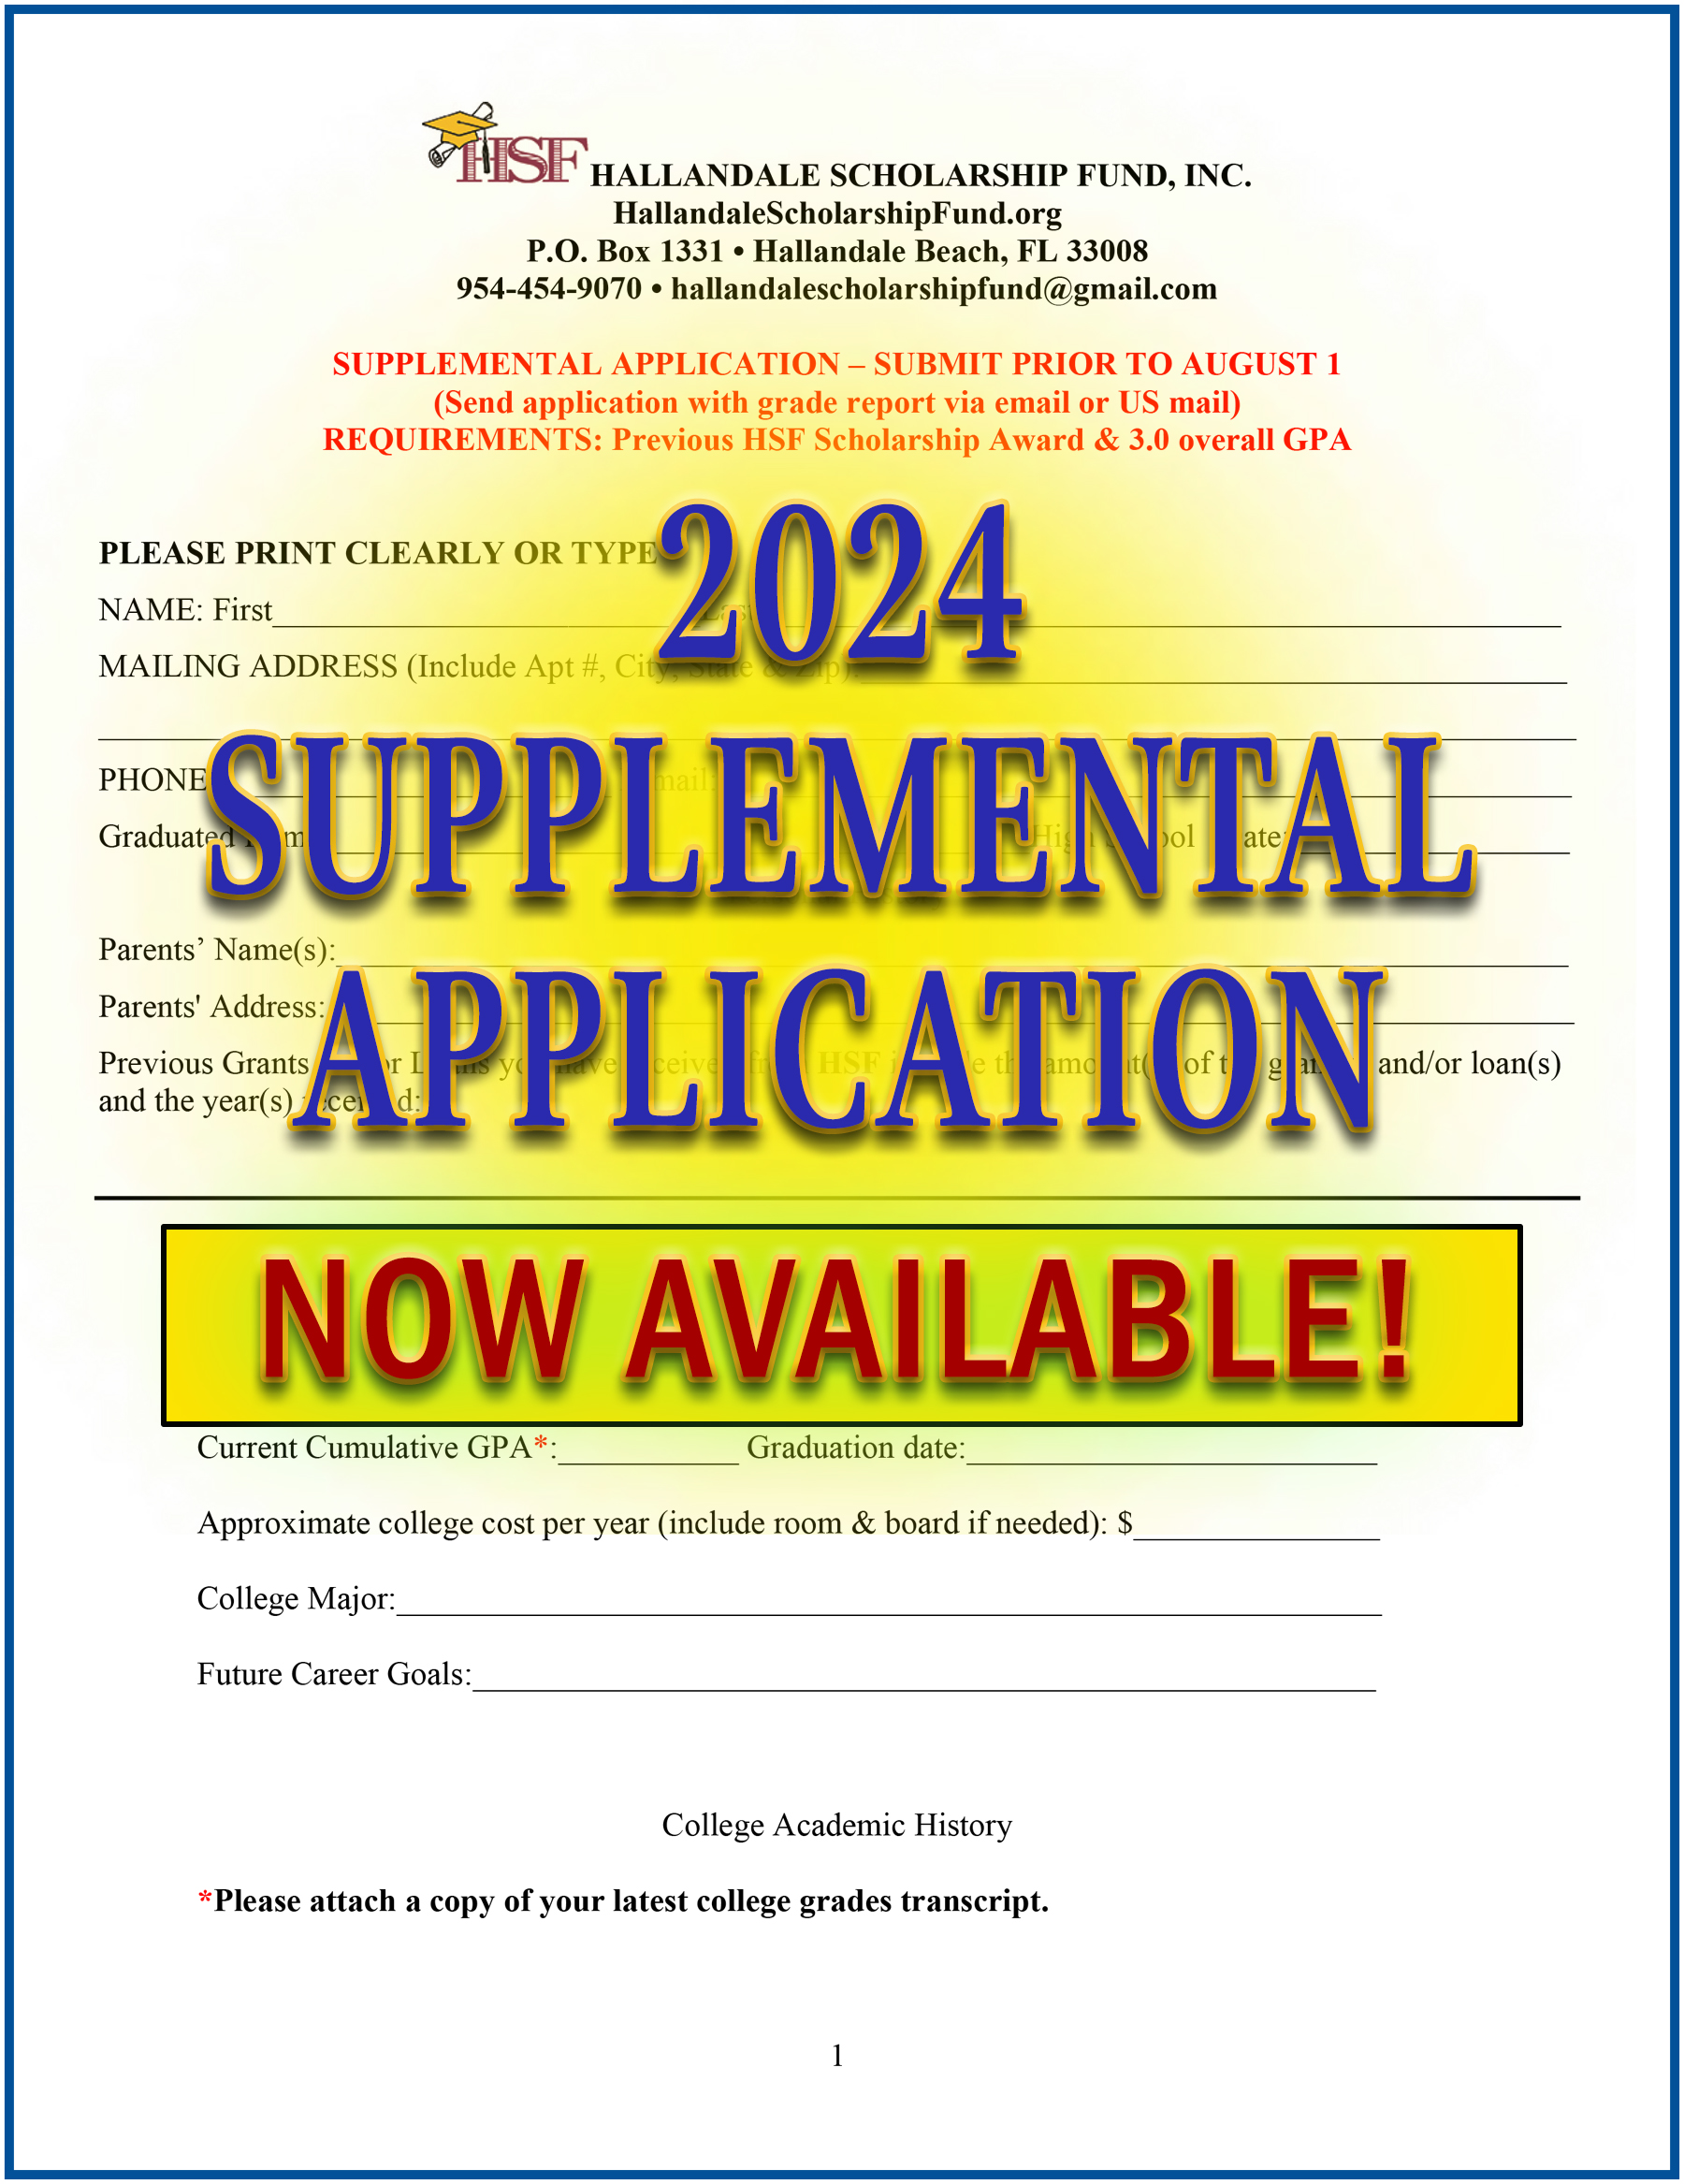 NOW AVAILABLE: 2024 Supplemental Application